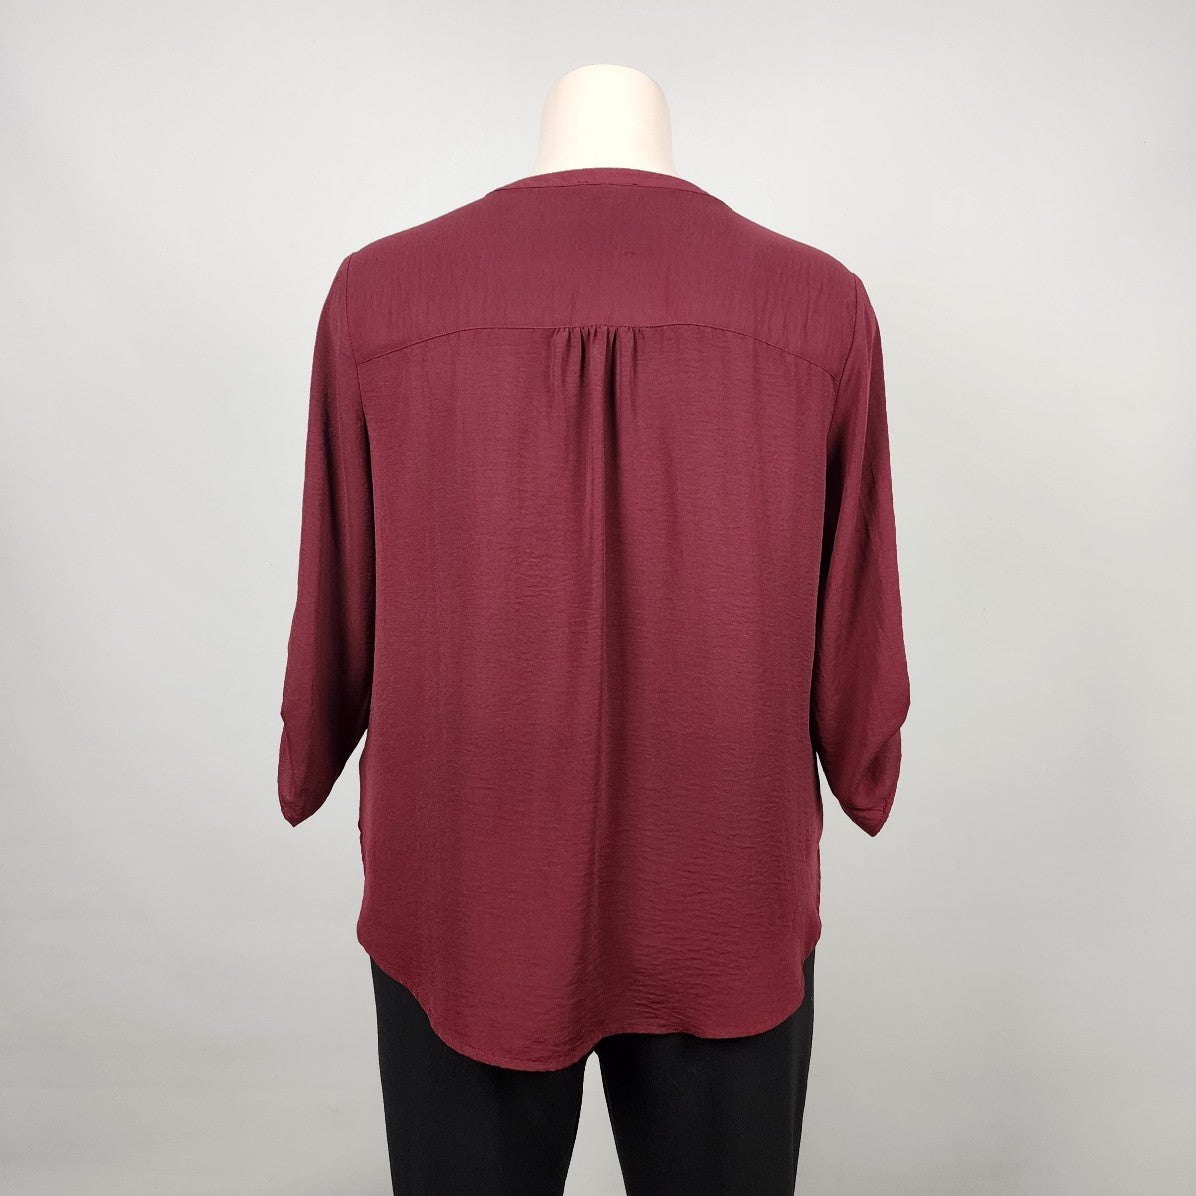 Maurices Burgundy 3/4 Sleeves Top Size 1X